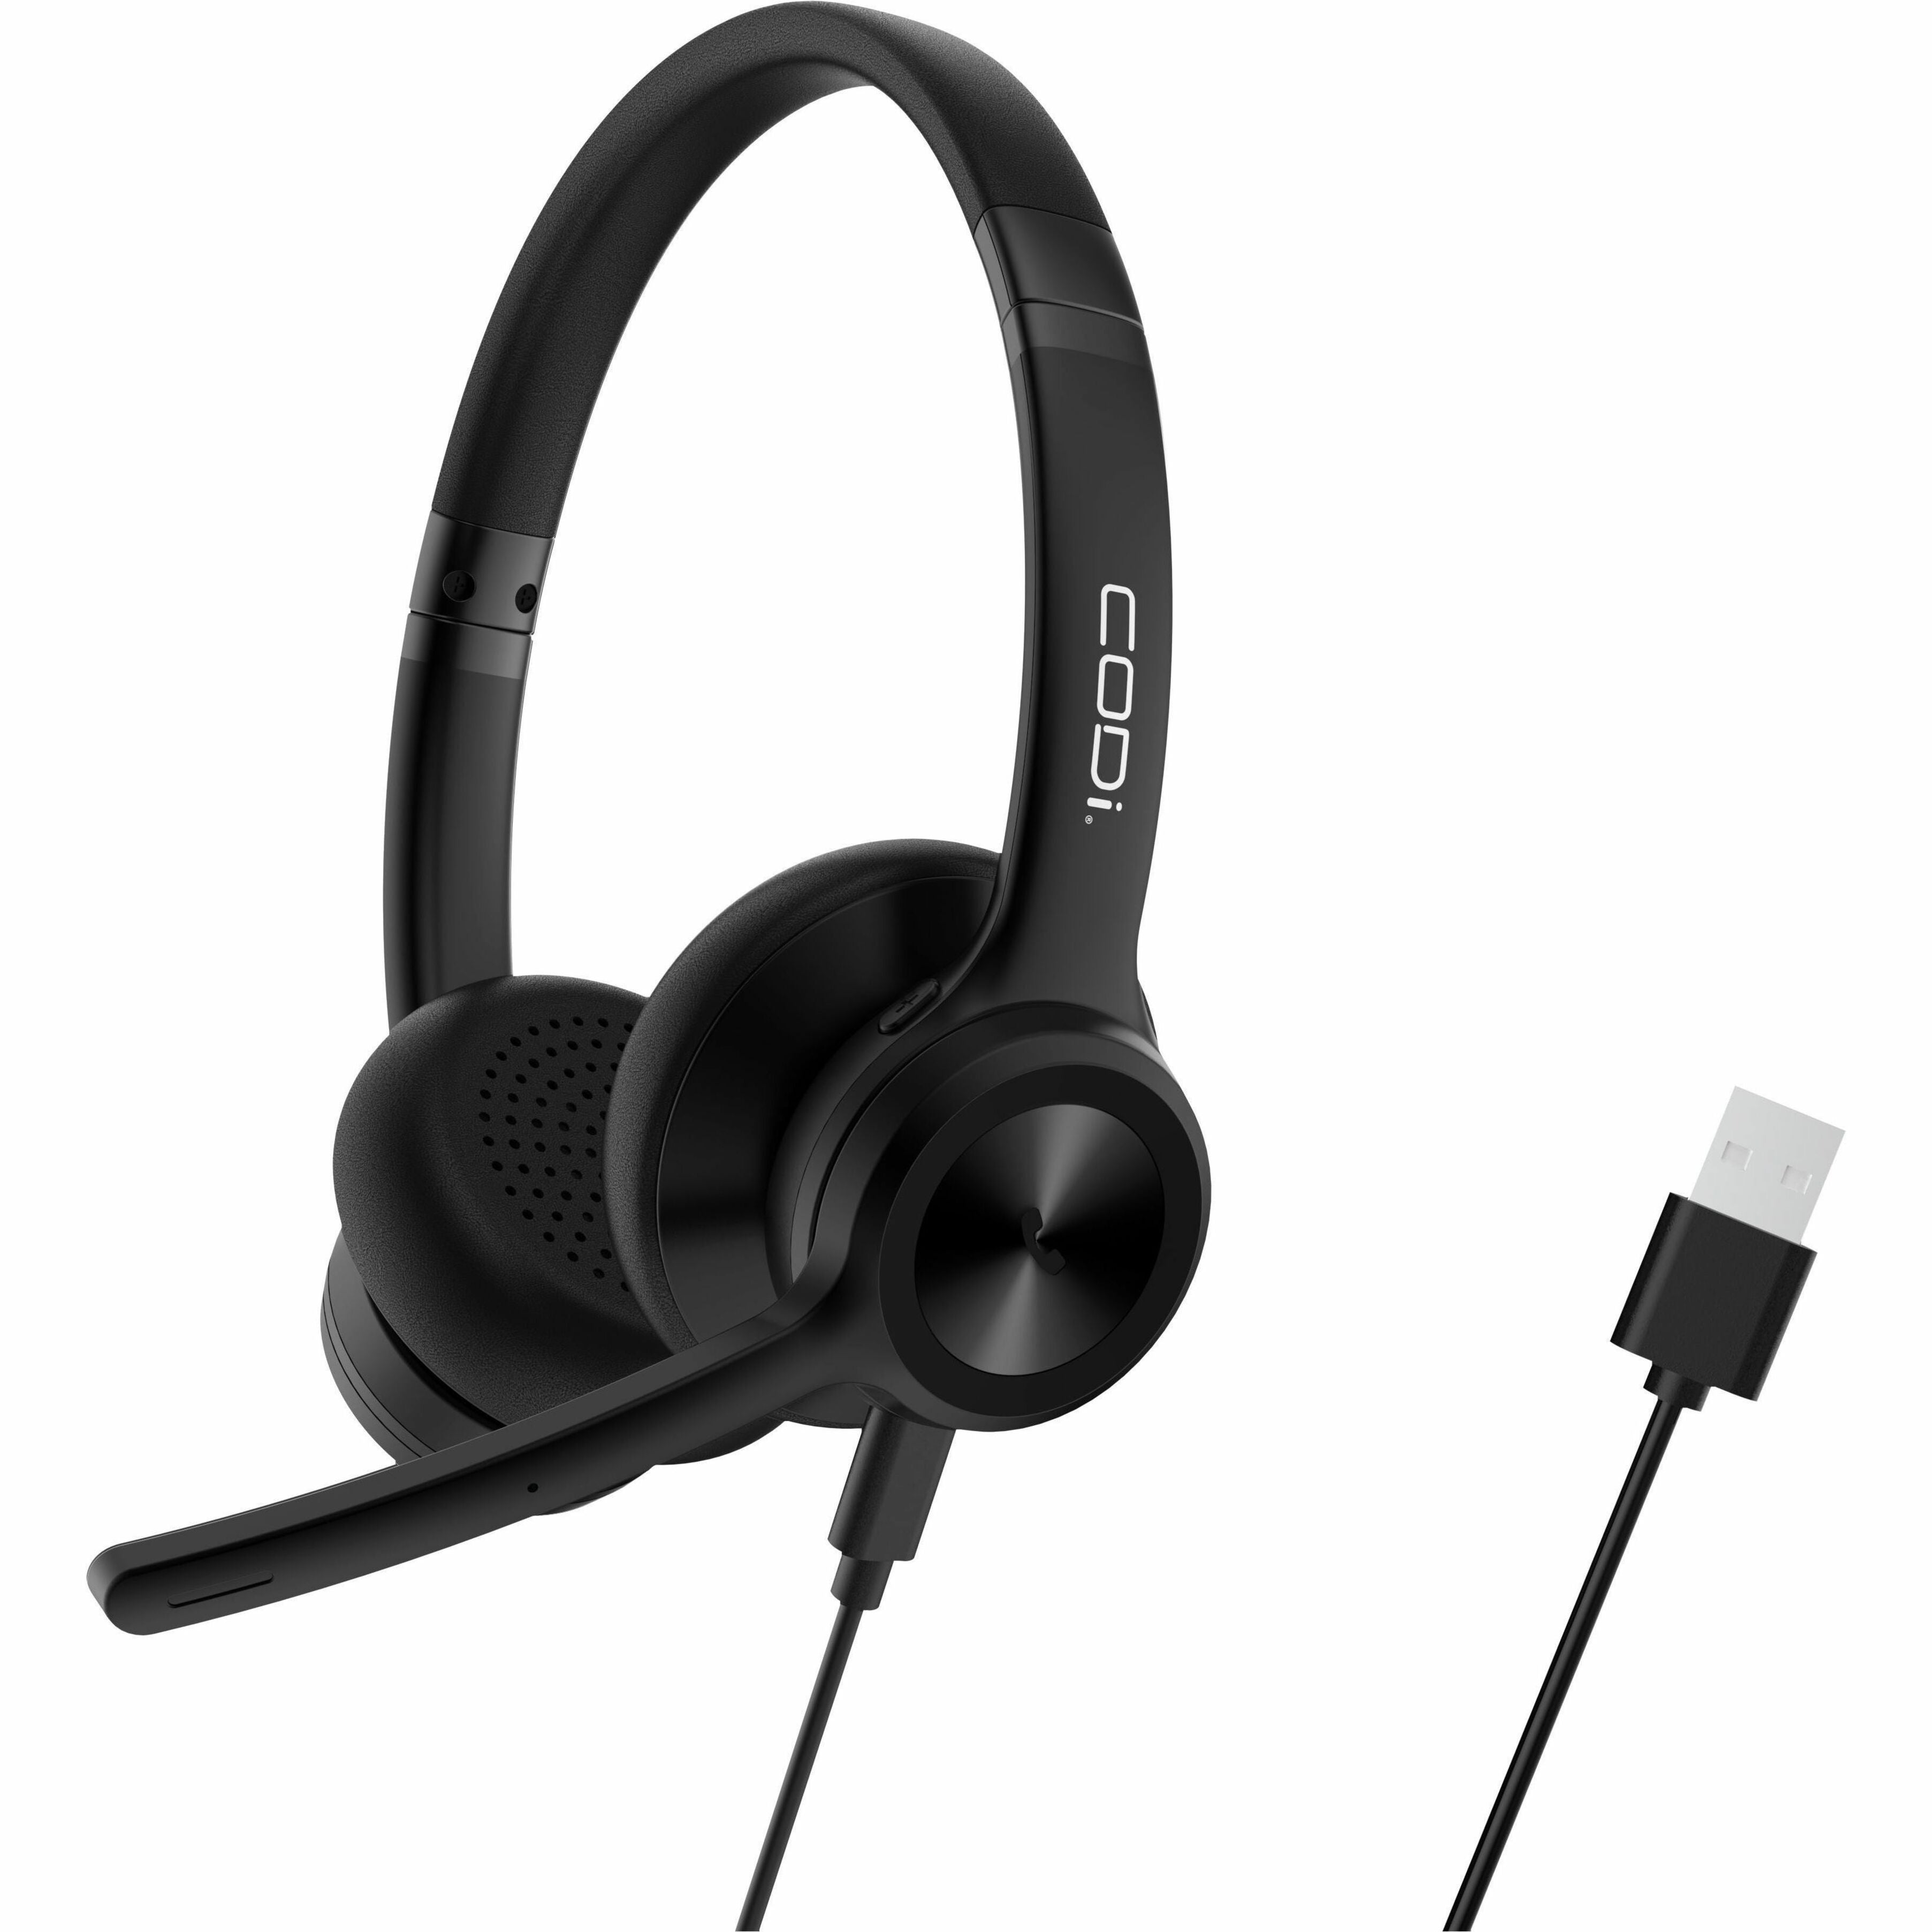 CODi A04618 Wired Stereo Dual Ear Headset w/ AI ENC Microphone, USB Type C, Noise Cancelling